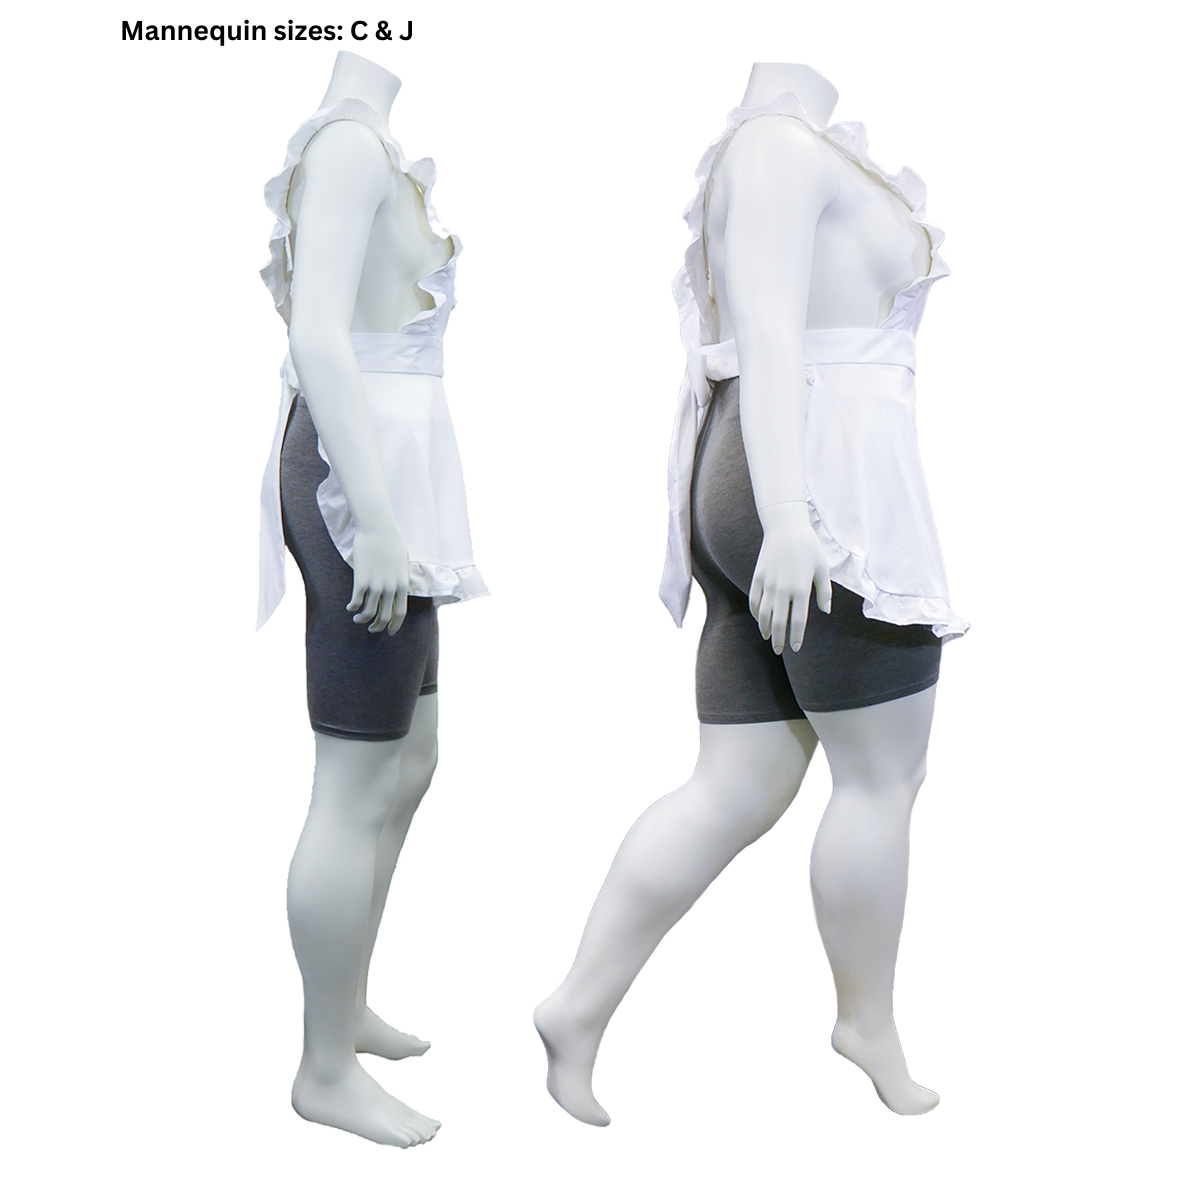 The profile views of two completed FSCO Aprons (f) on size C and J mannequins. The ruffle detailing is visible on the straps and bottom of the apron. The apron's length hits mid-thigh.